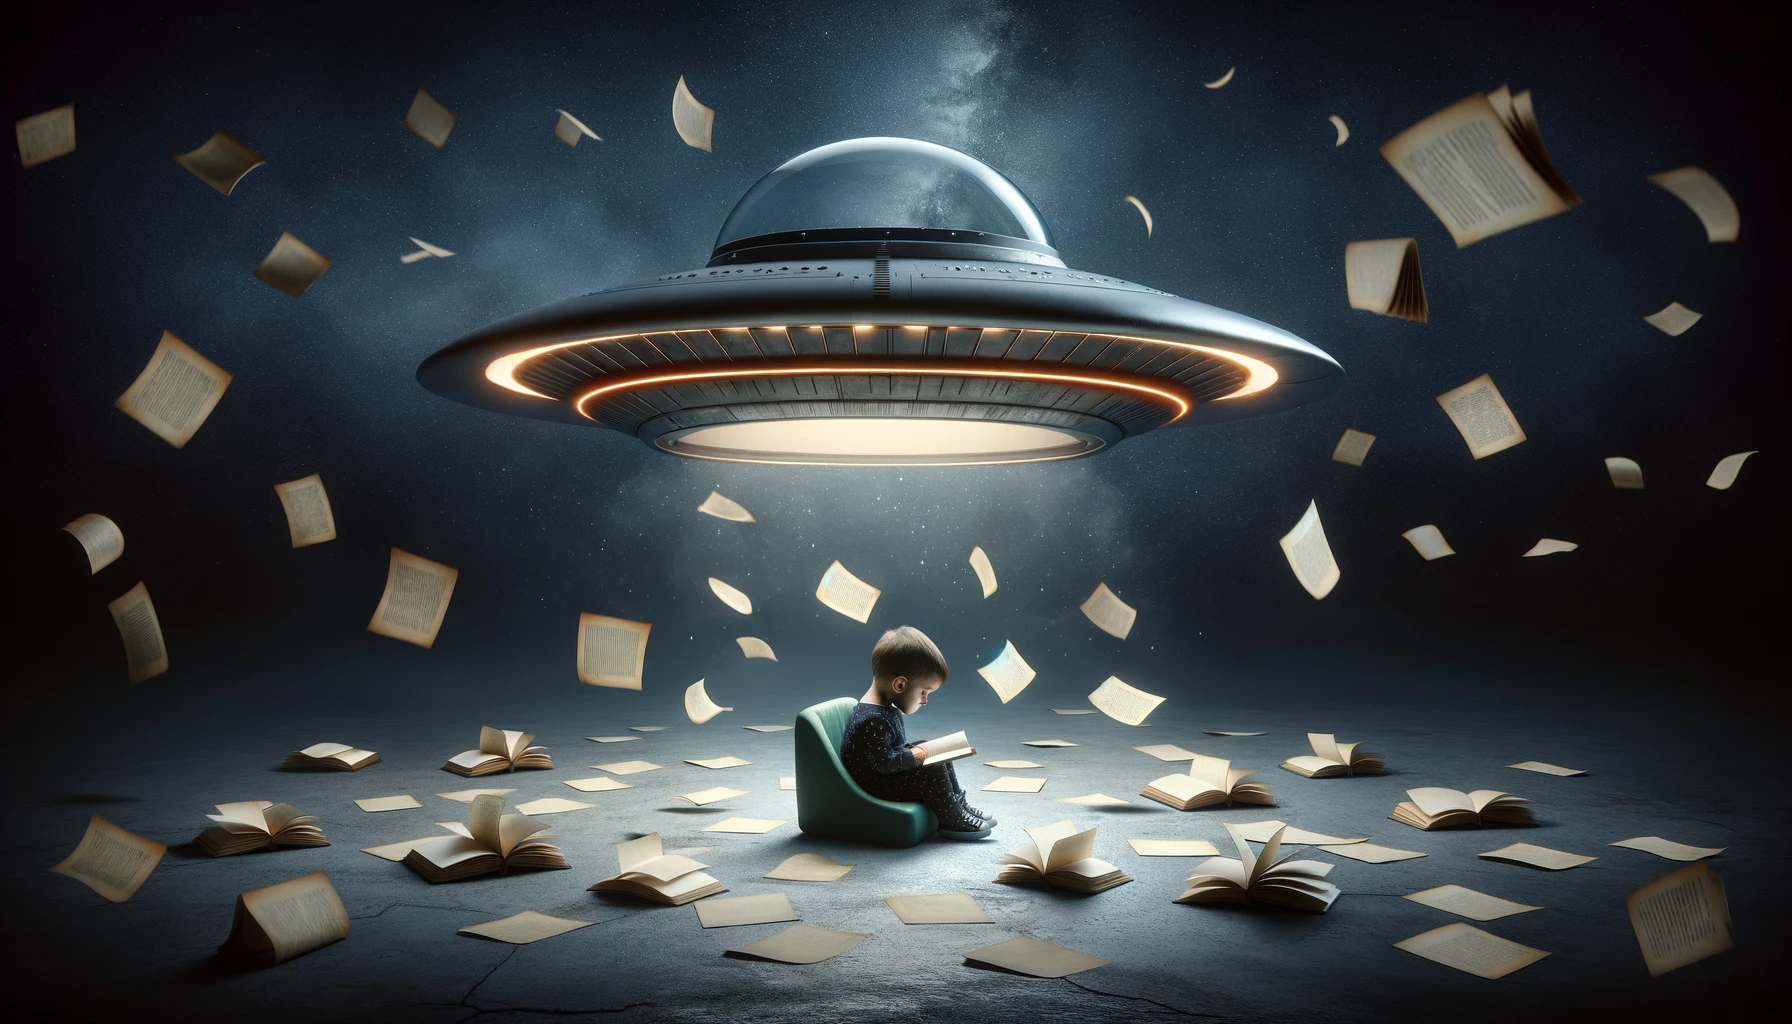 A thought-provoking scene depicting a small child inside a UFO, symbolizing a novel's main character, with the theme of the novel being discontinued. The child looks contemplative, surrounded by scattered, faded pages of a book, signifying the novel's end of publication. The interior of the UFO is dimly lit and slightly melancholic, reflecting the theme of discontinuation. In the background, a large, closed book floats, symbolizing the closure of the story. The outer space setting adds a sense of isolation and finality to the image.